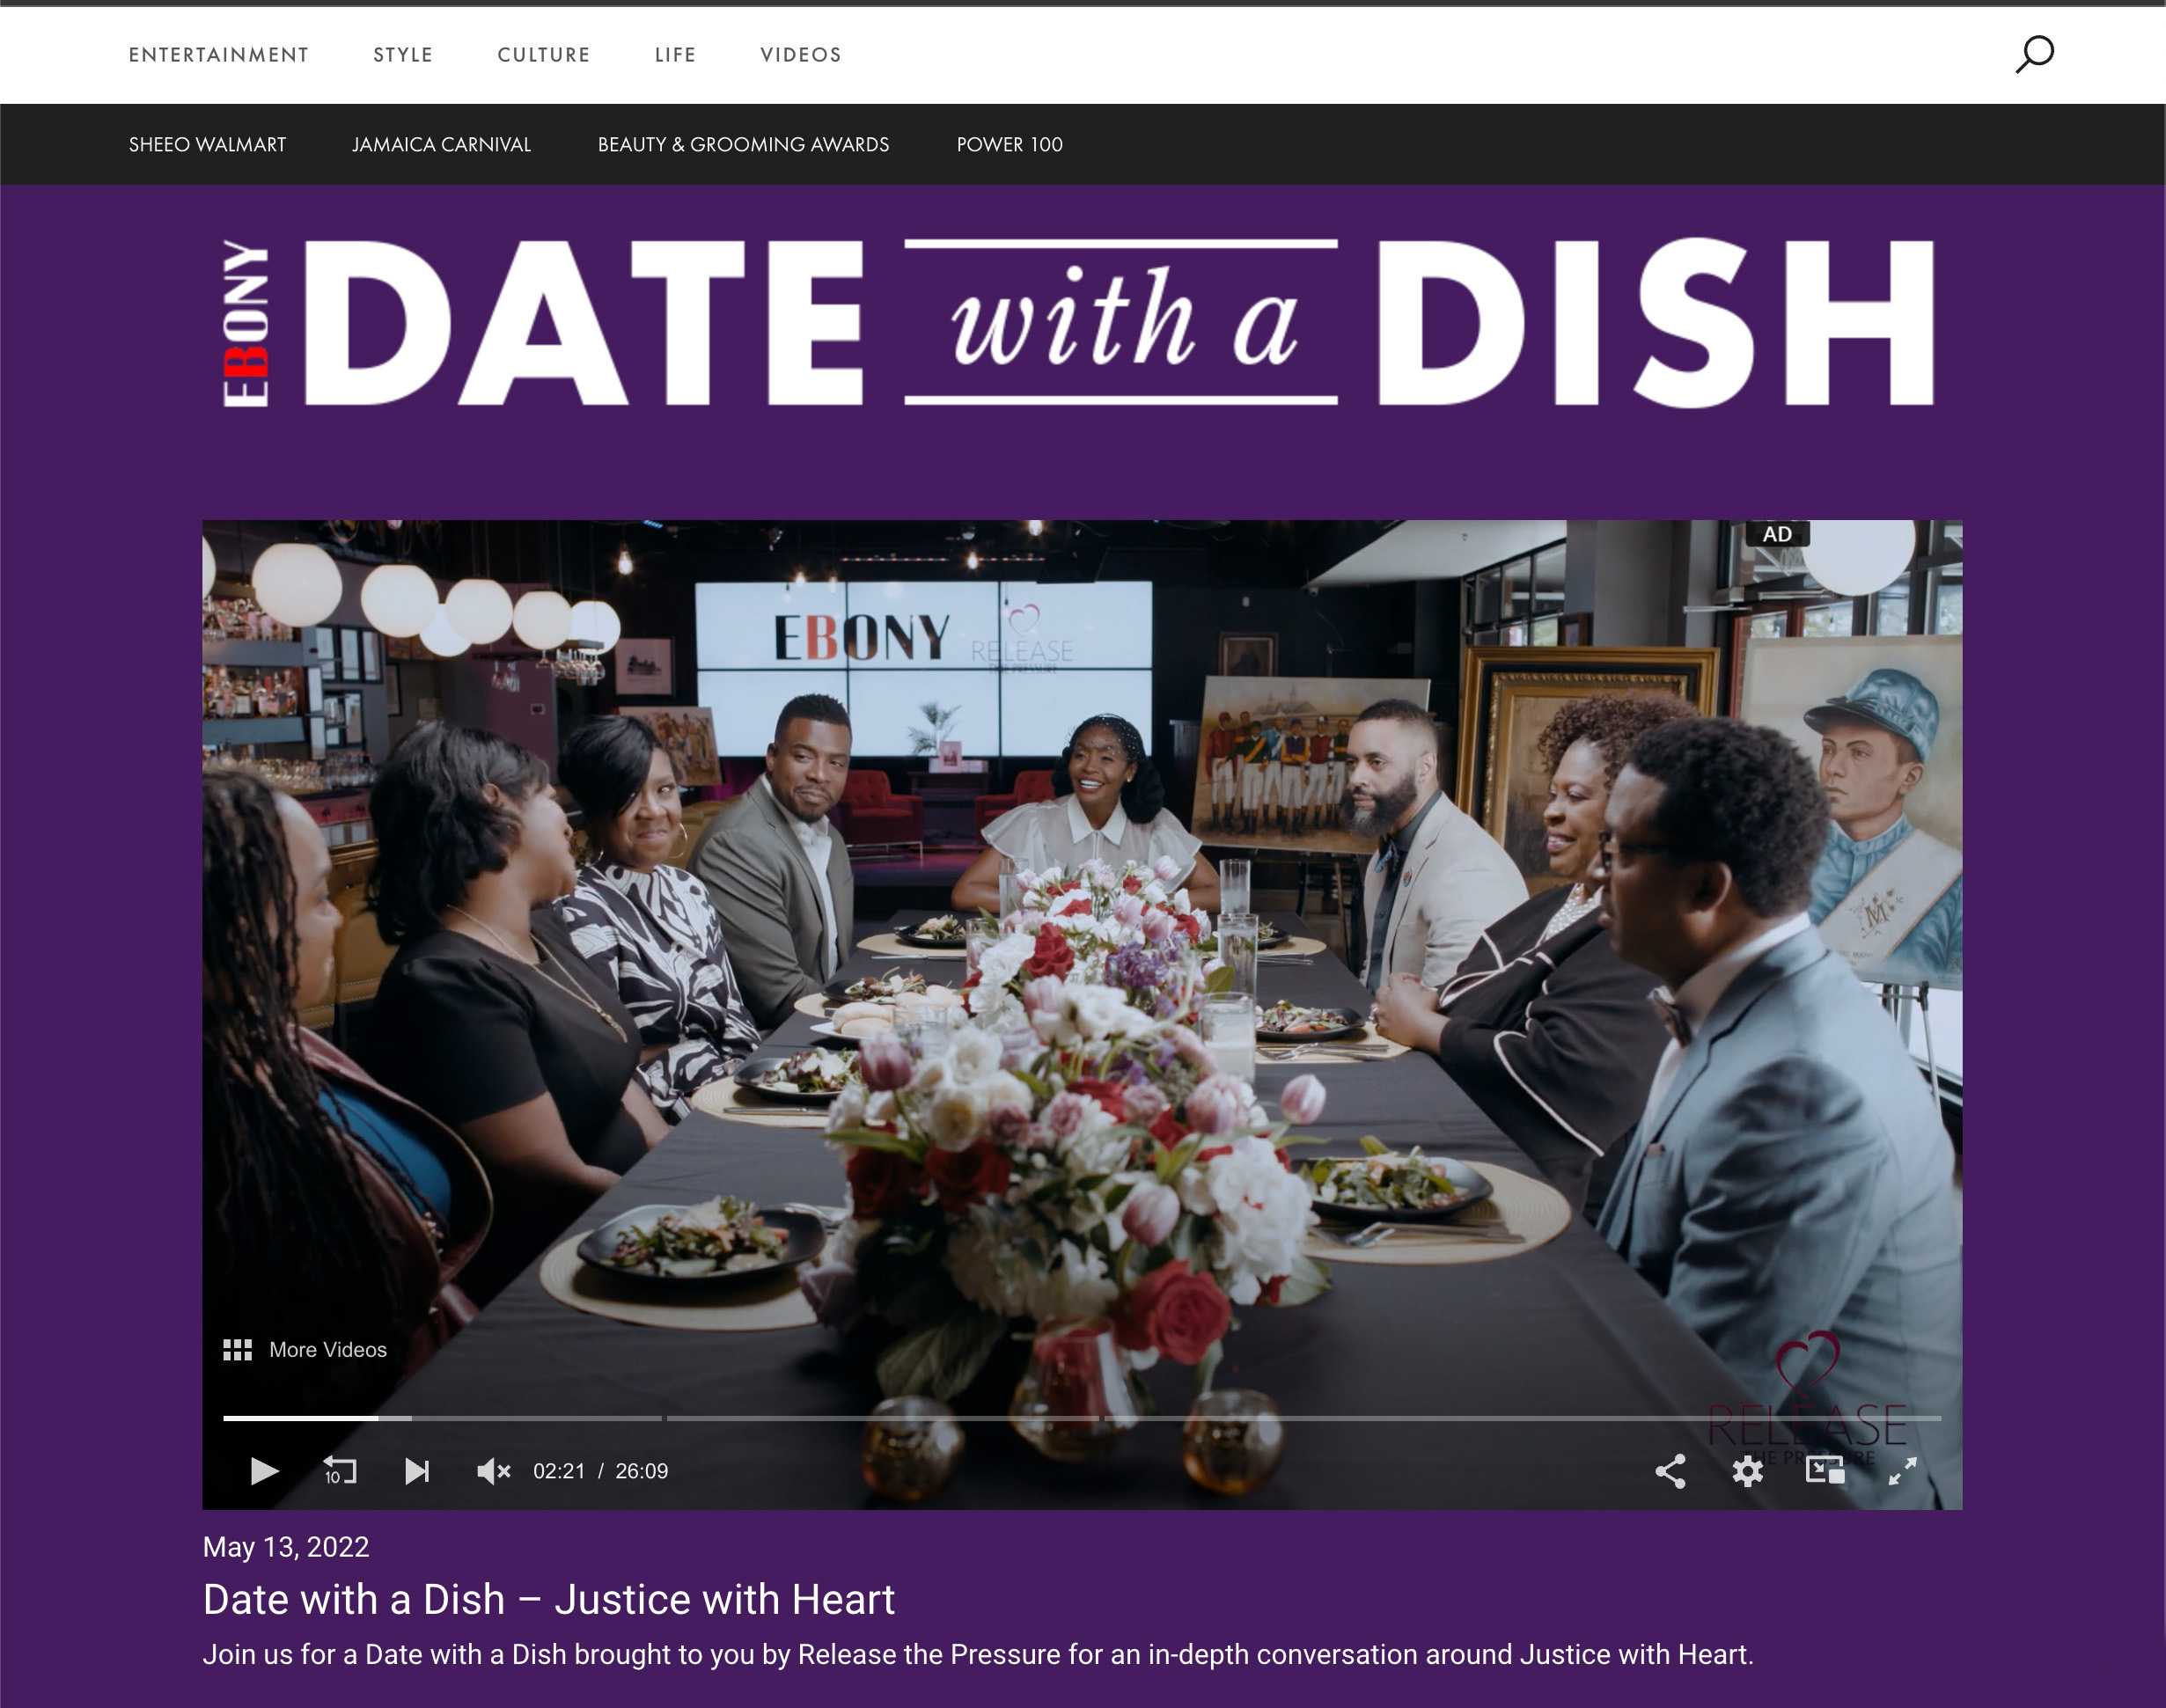 Date with Dish webpage with a purple background and a video of people sitting at a table together.